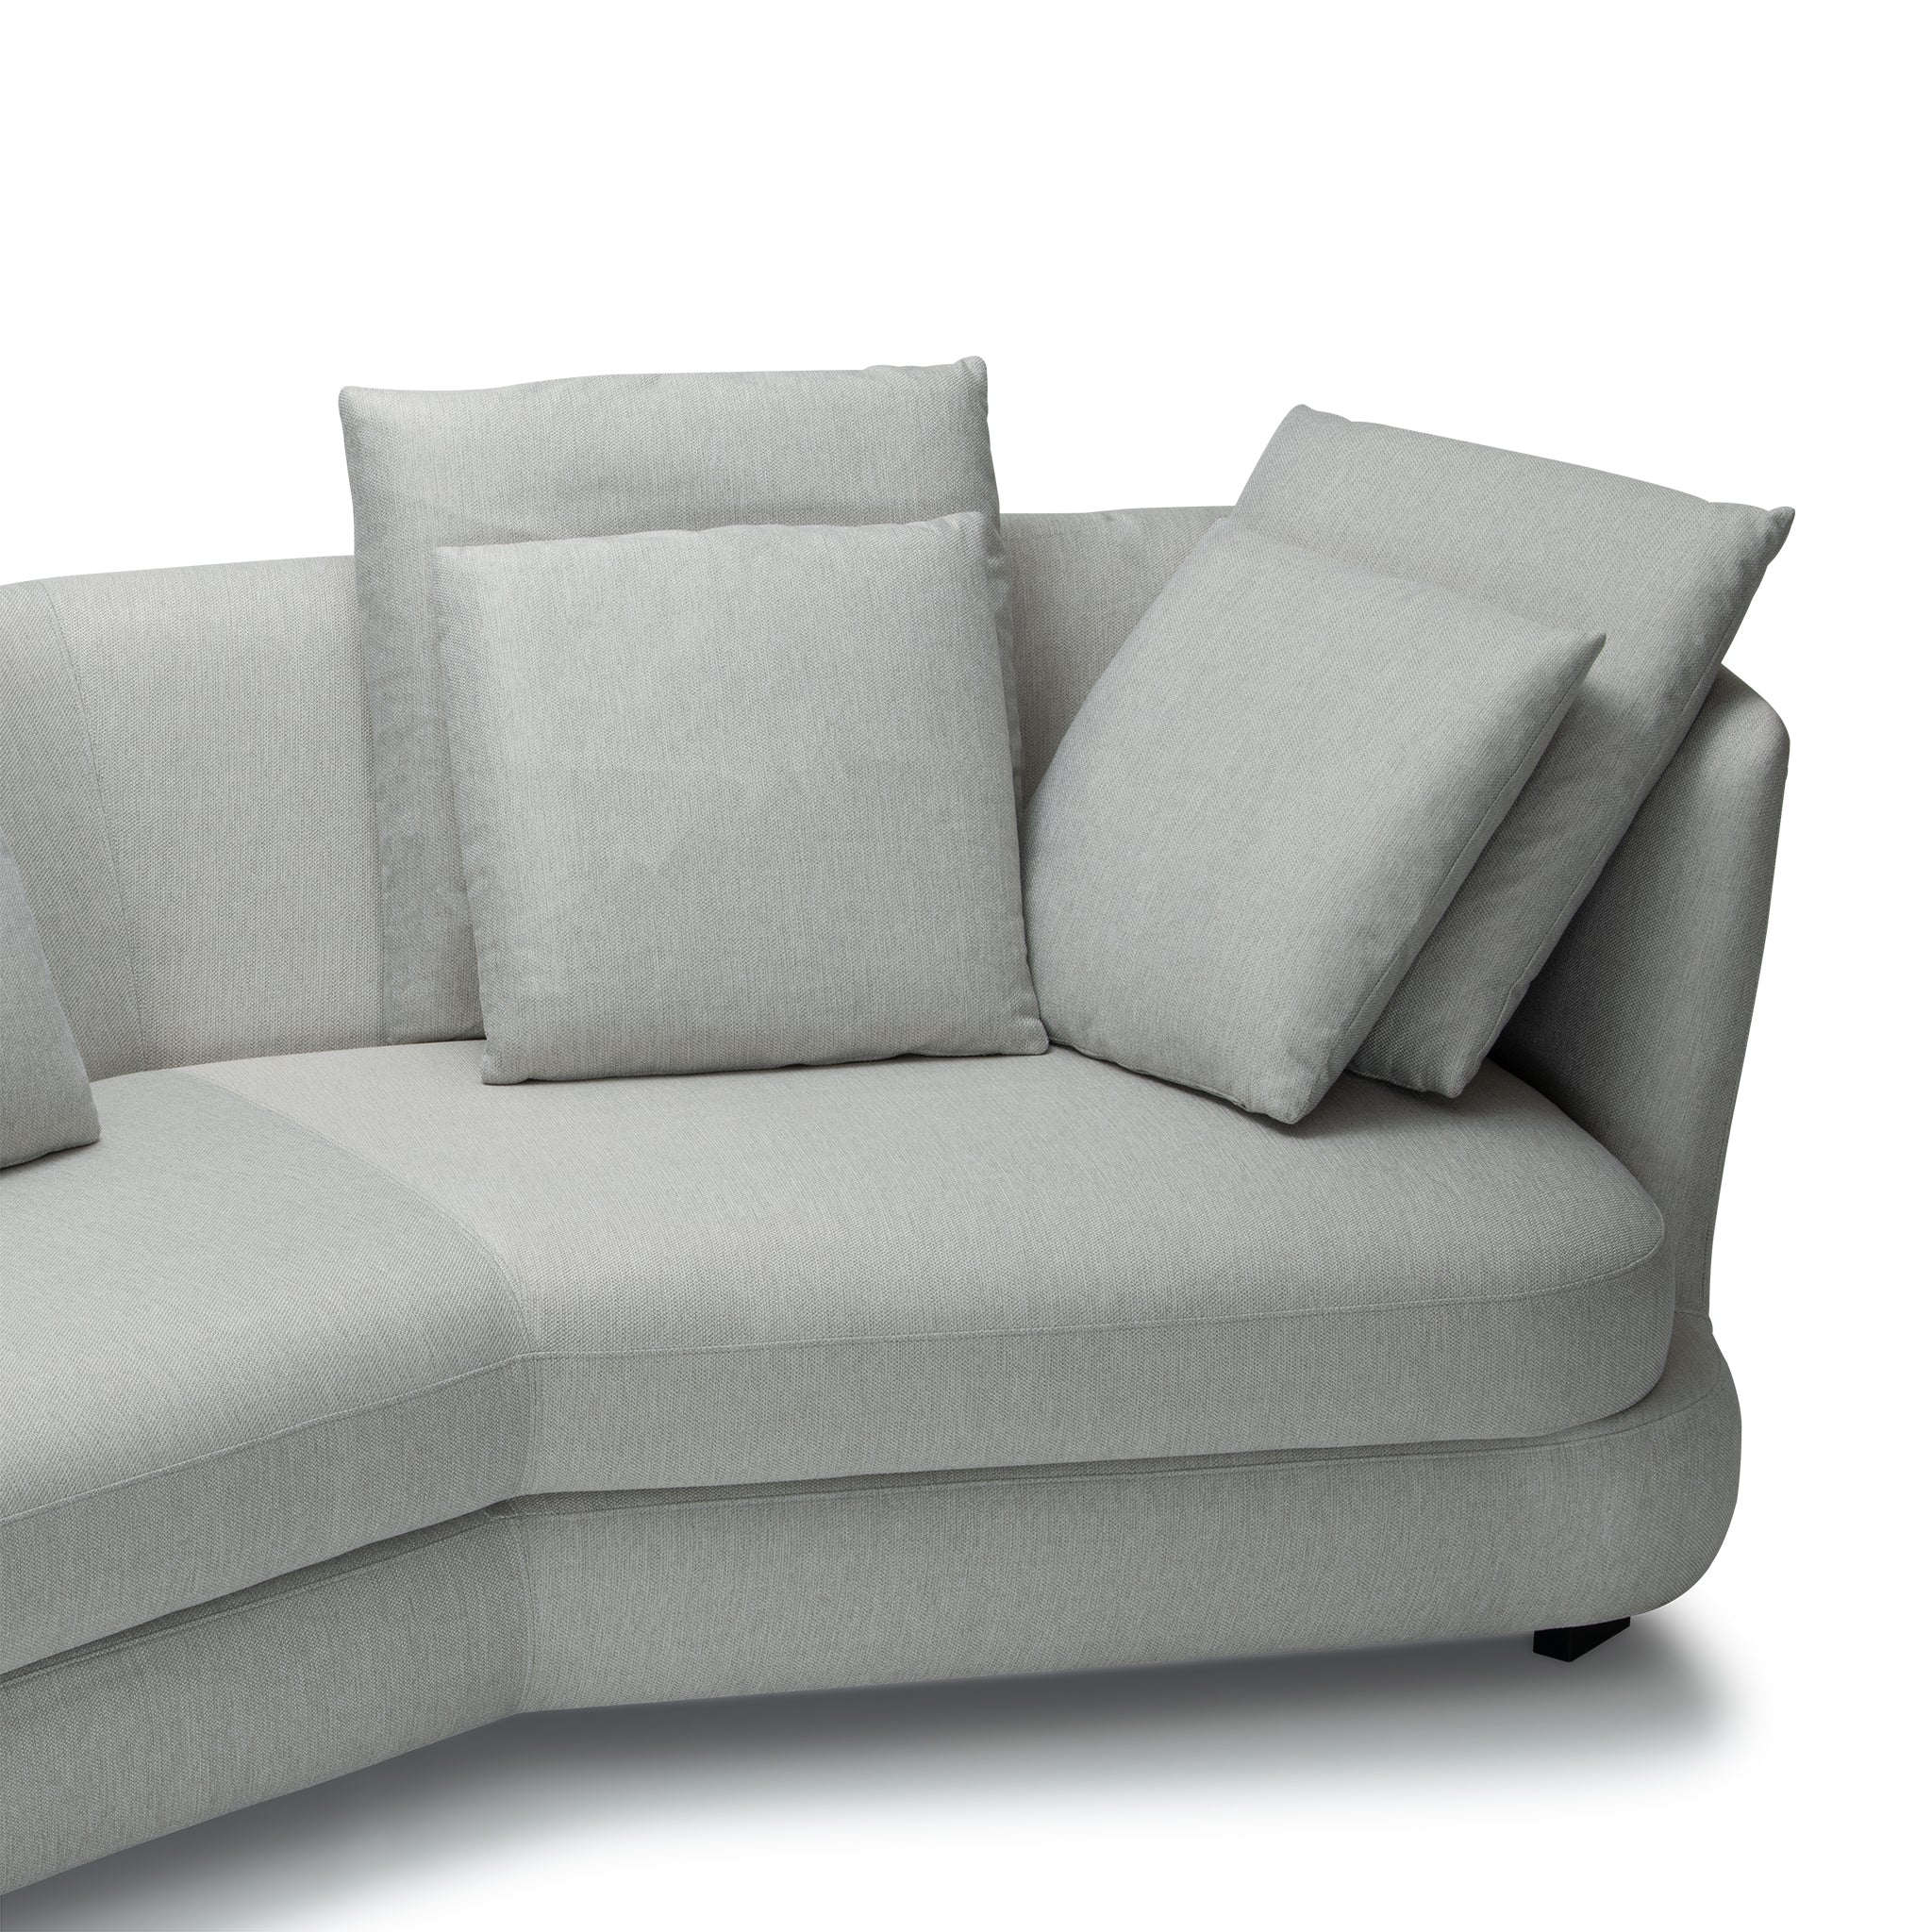 that's living collections bucareste grande ivory sofa loveseats & sofas 